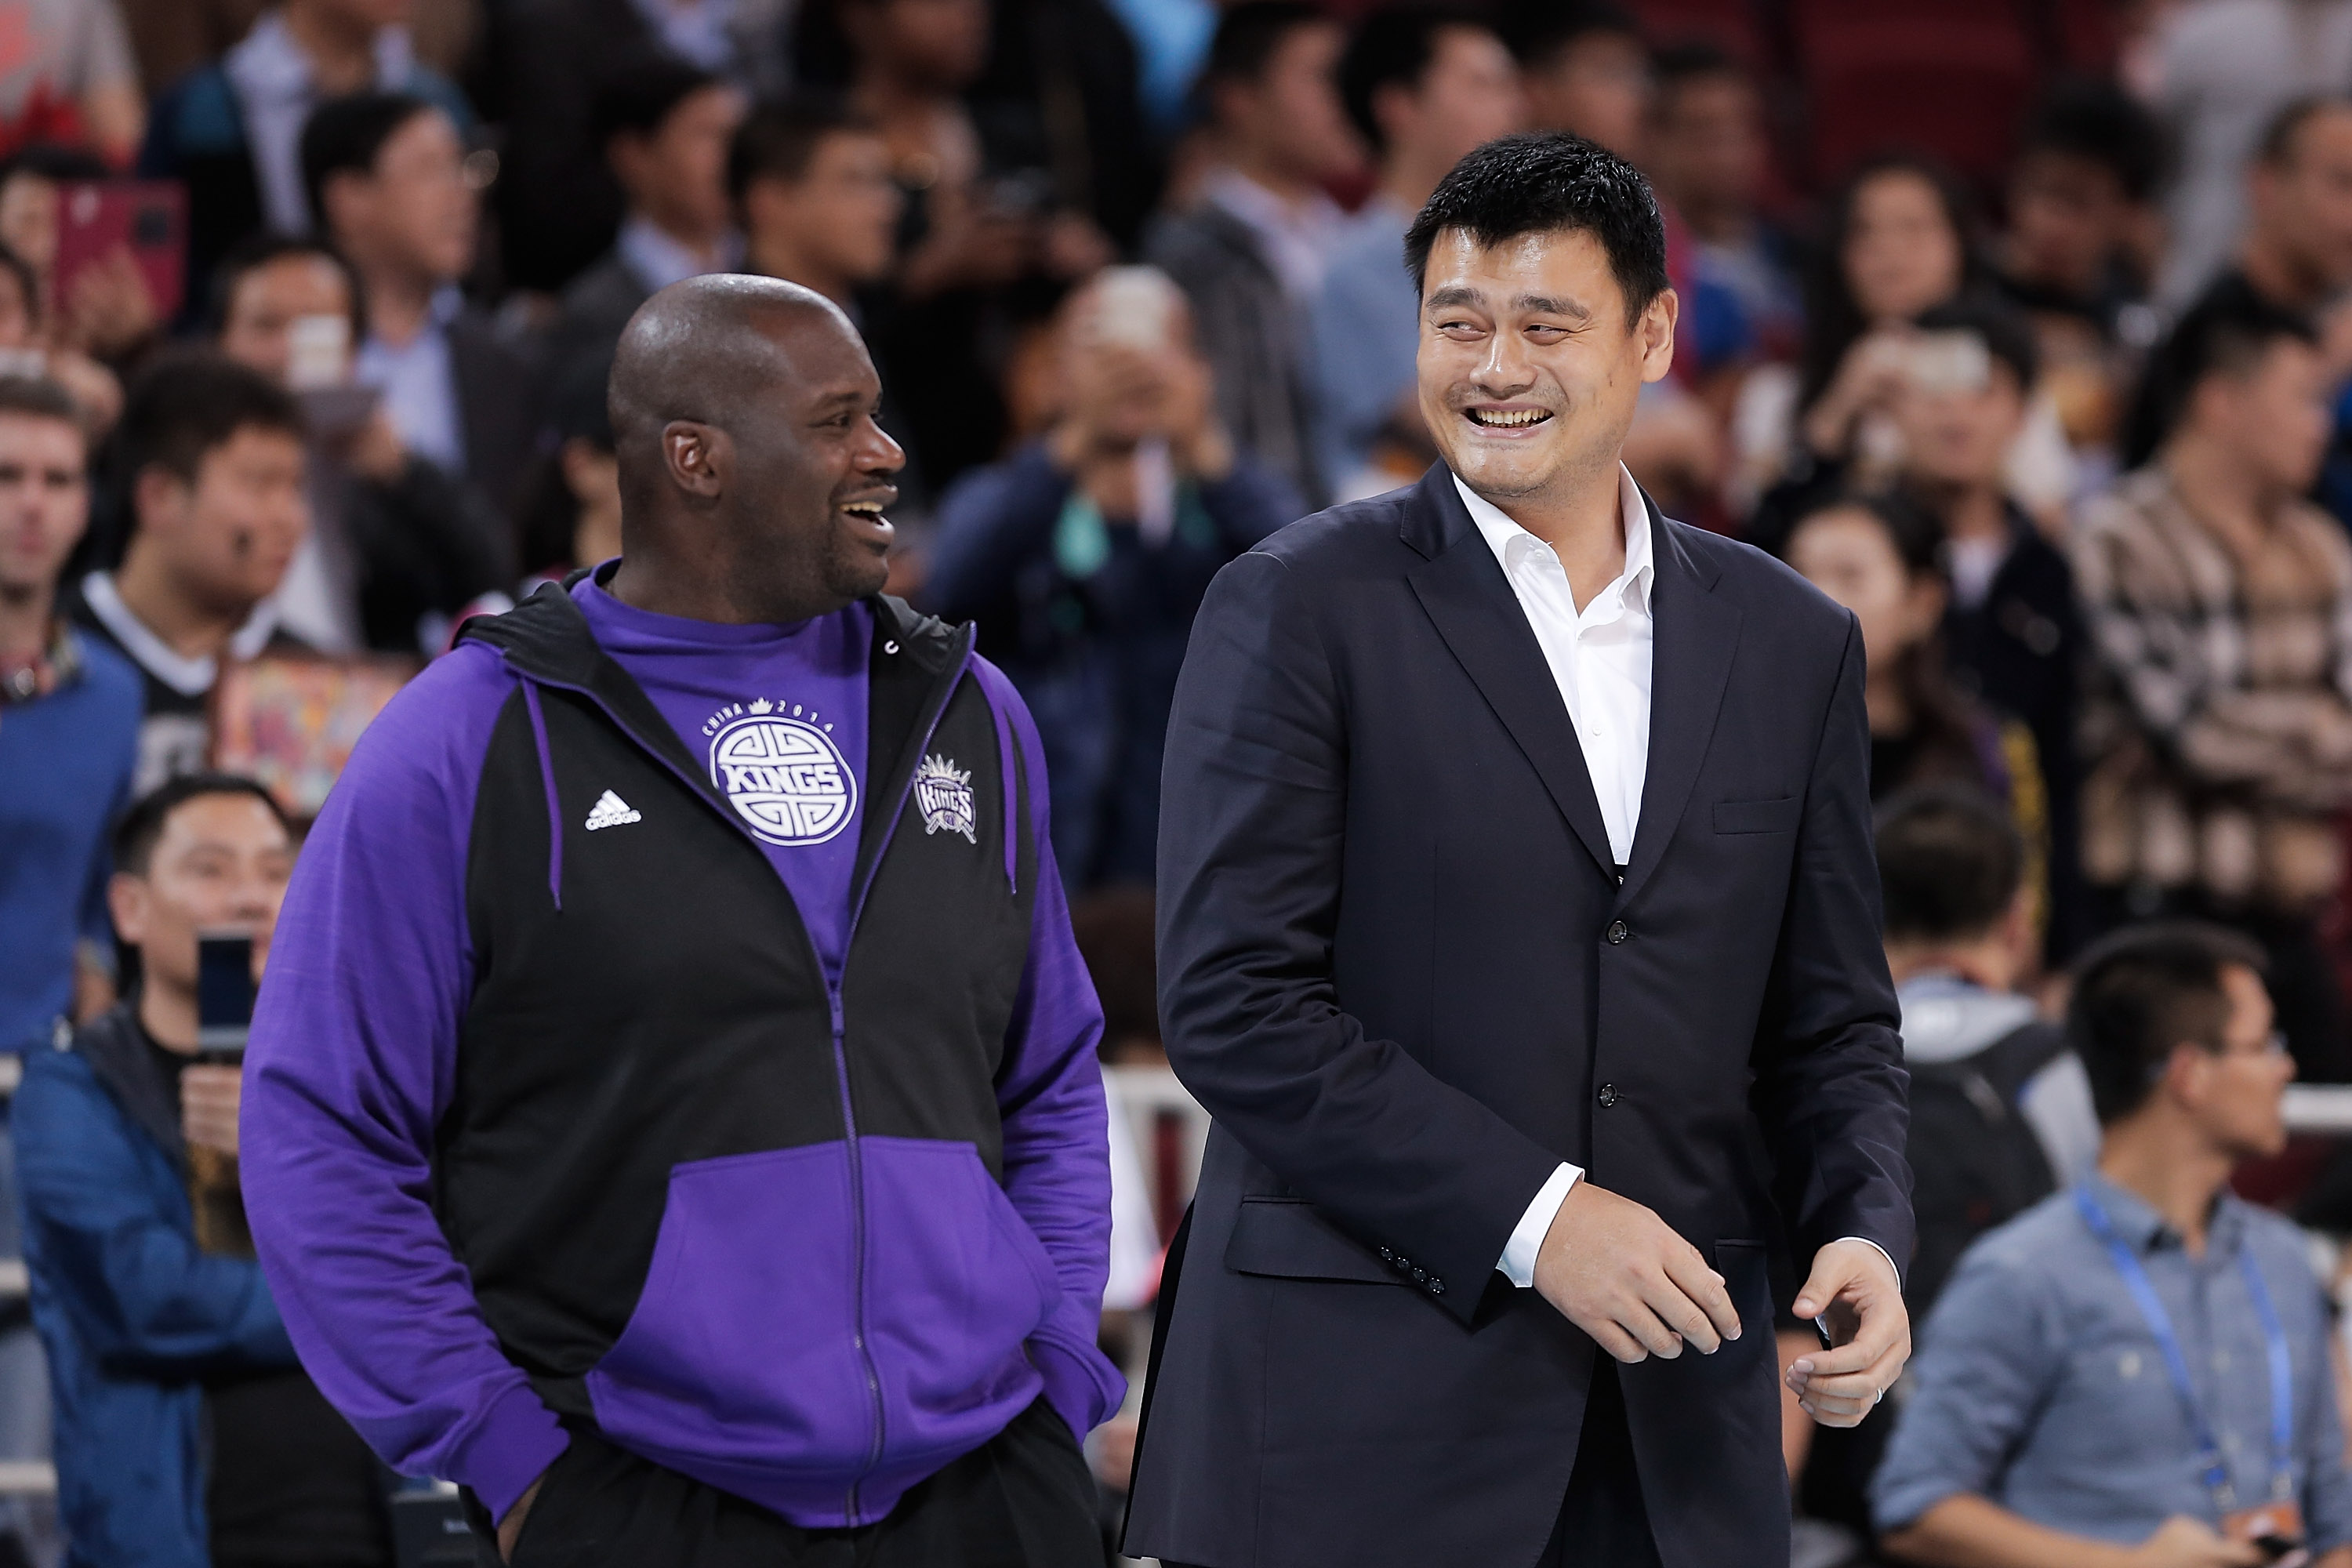 Shaquille O'Neal and Yao Ming converse during an NBA exhibition in China in 2014